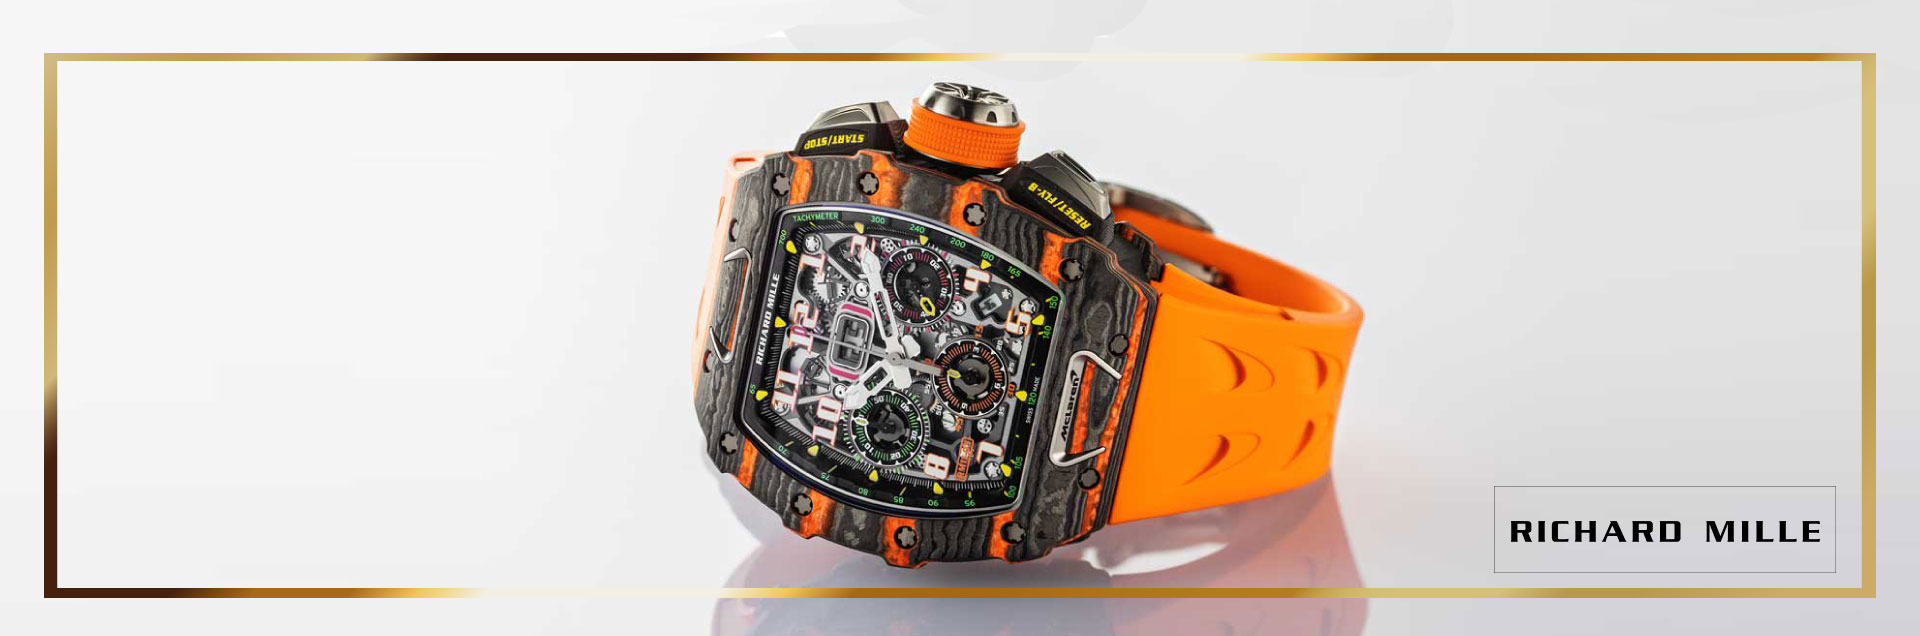 Sell-your-Richard-Mille-watch-in-the-seybold-jewelry-building